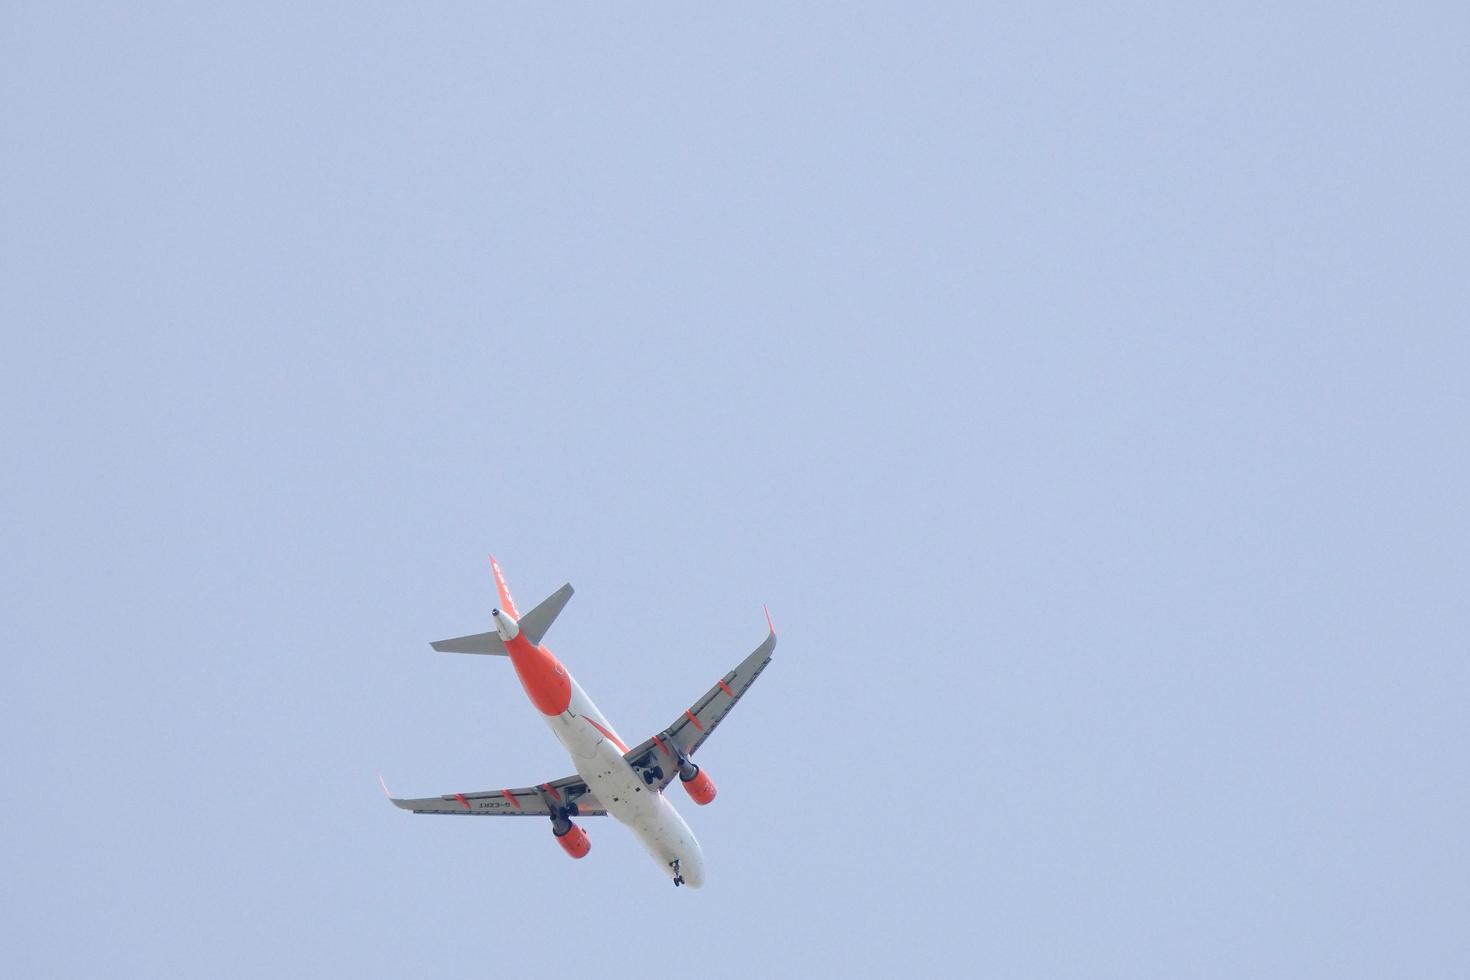 commercial aircraft flying under blue skies and arriving at the airport photo